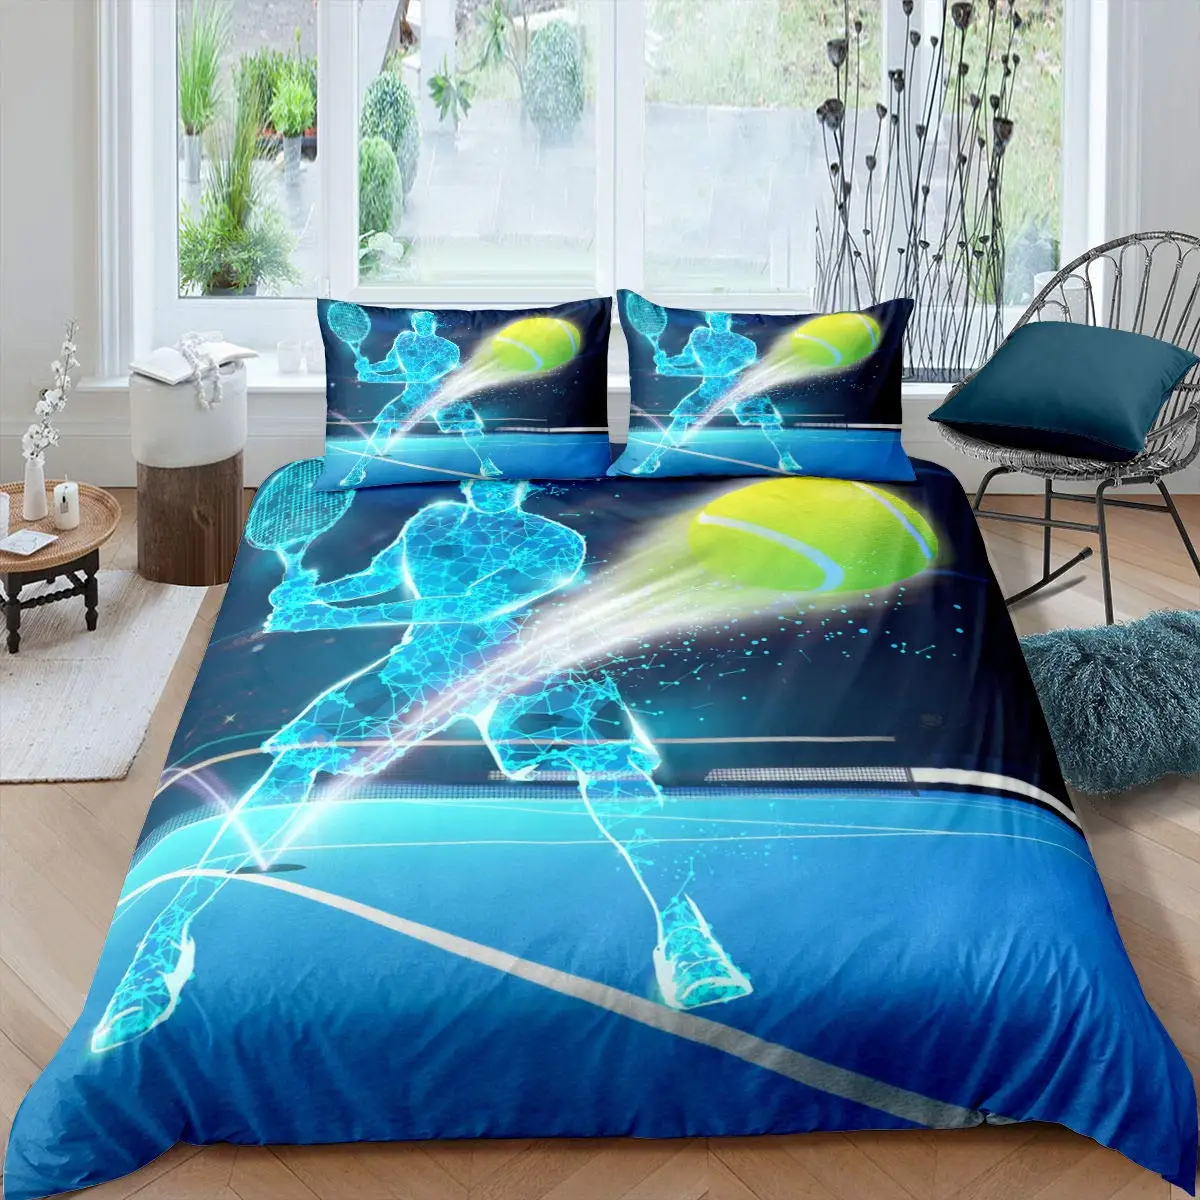 

Tennis Ball Duvet Cover Set Sports Game Themed Bedding Set Twin Size for Kids Teens Adult Tennis Racket Ball Comforter Cover